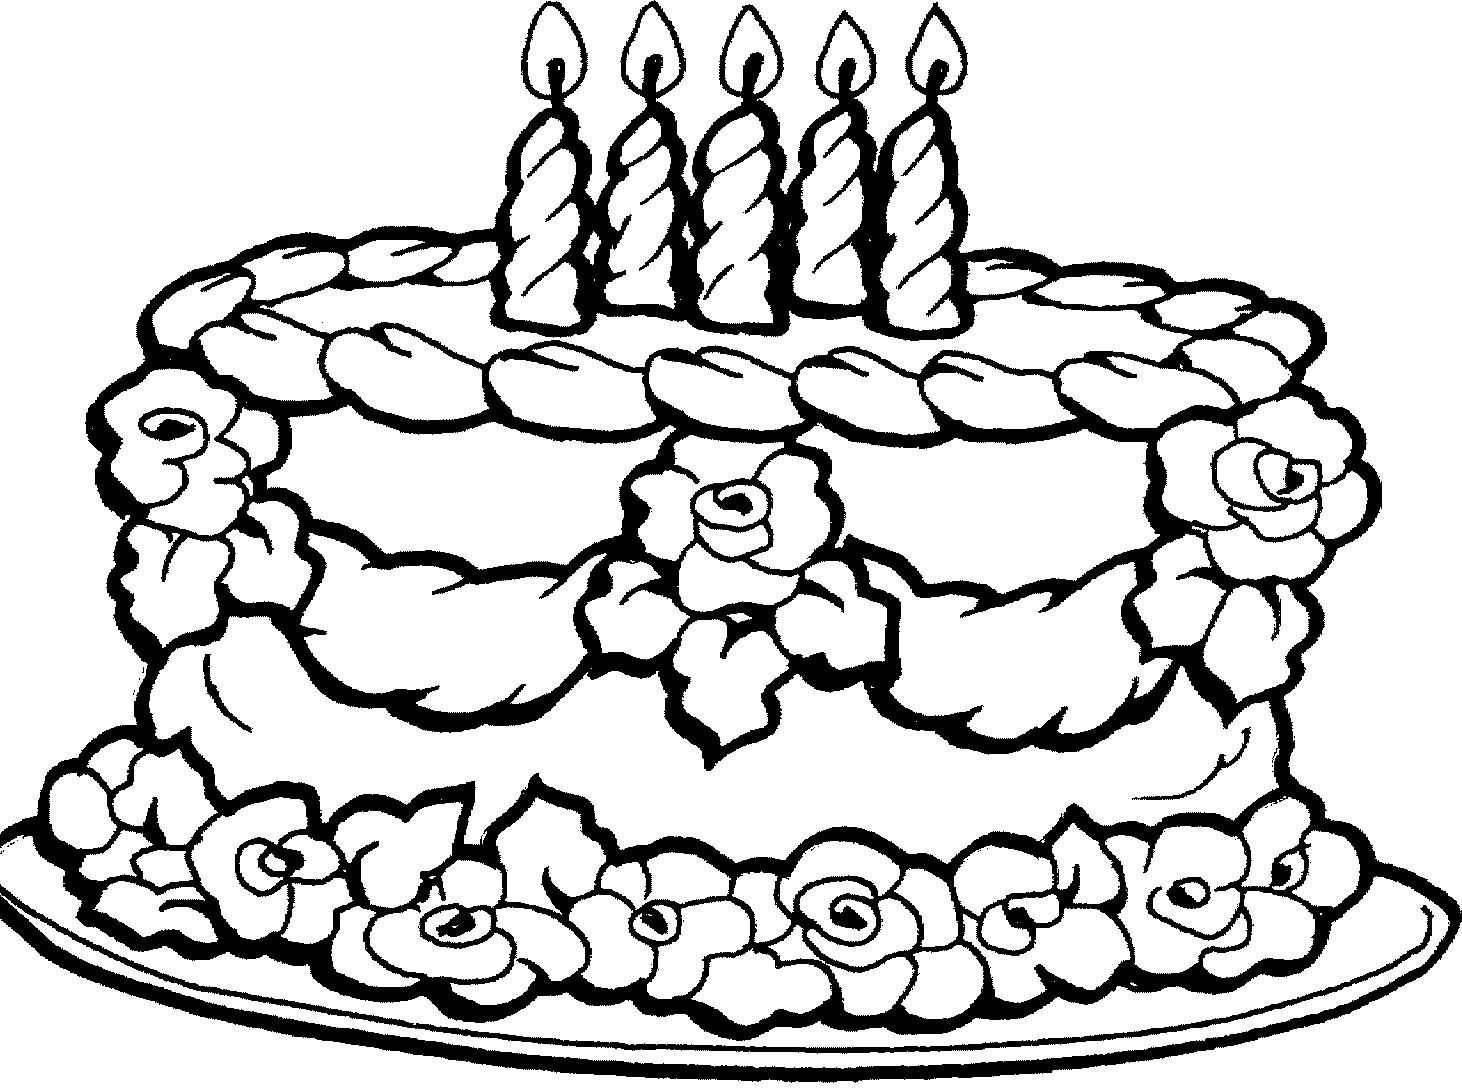 Coloring Pages Of Birthday Cakes Dragon With Happy Cake Page Free - Free Printable Pictures Of Birthday Cakes